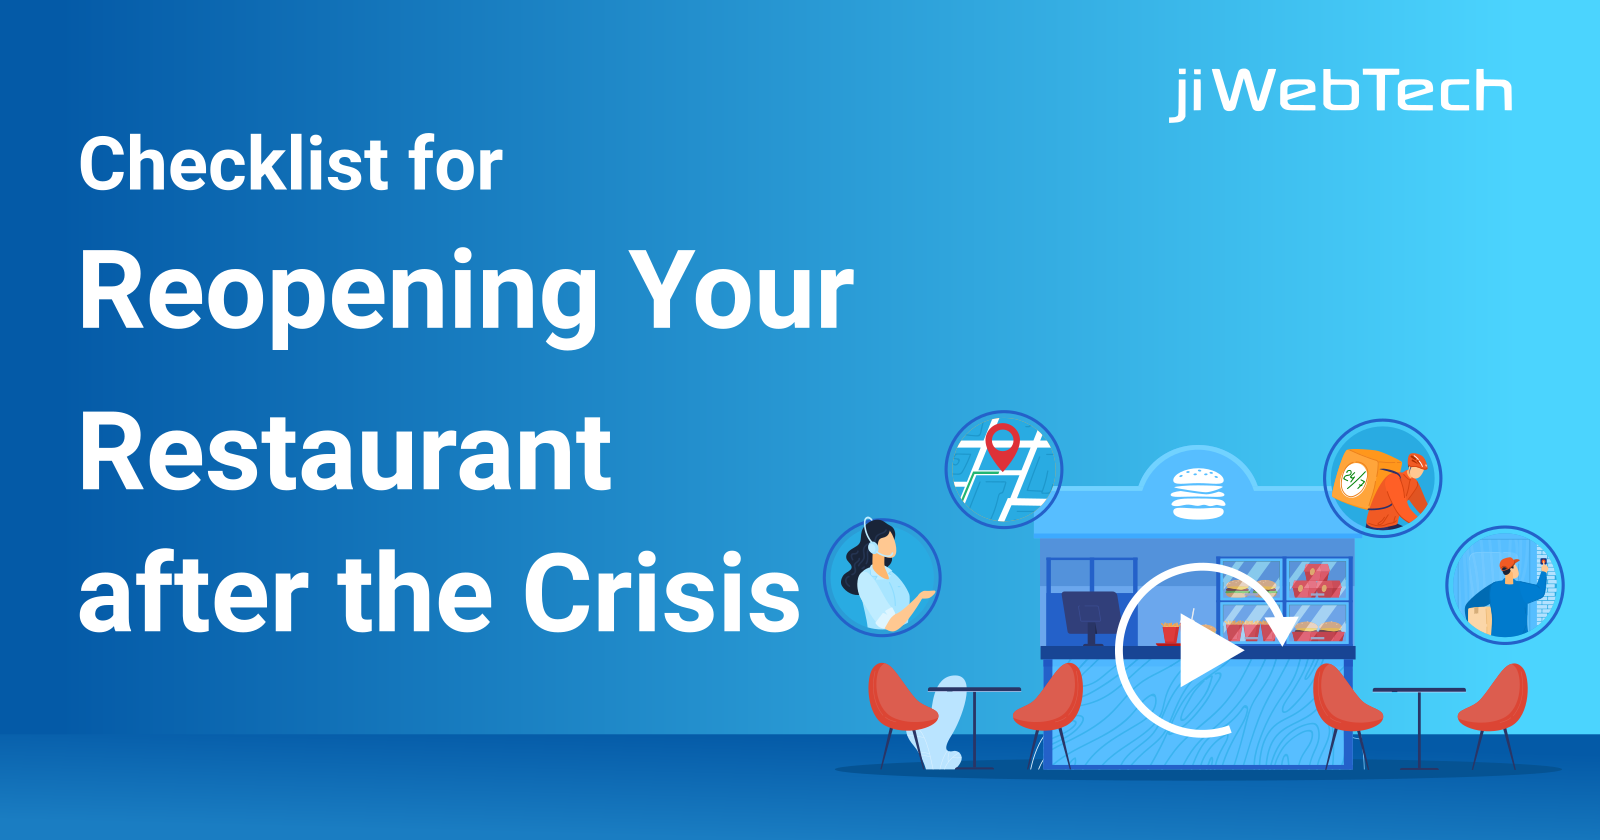 Checklist for Reopening Your Restaurant after the Crisis